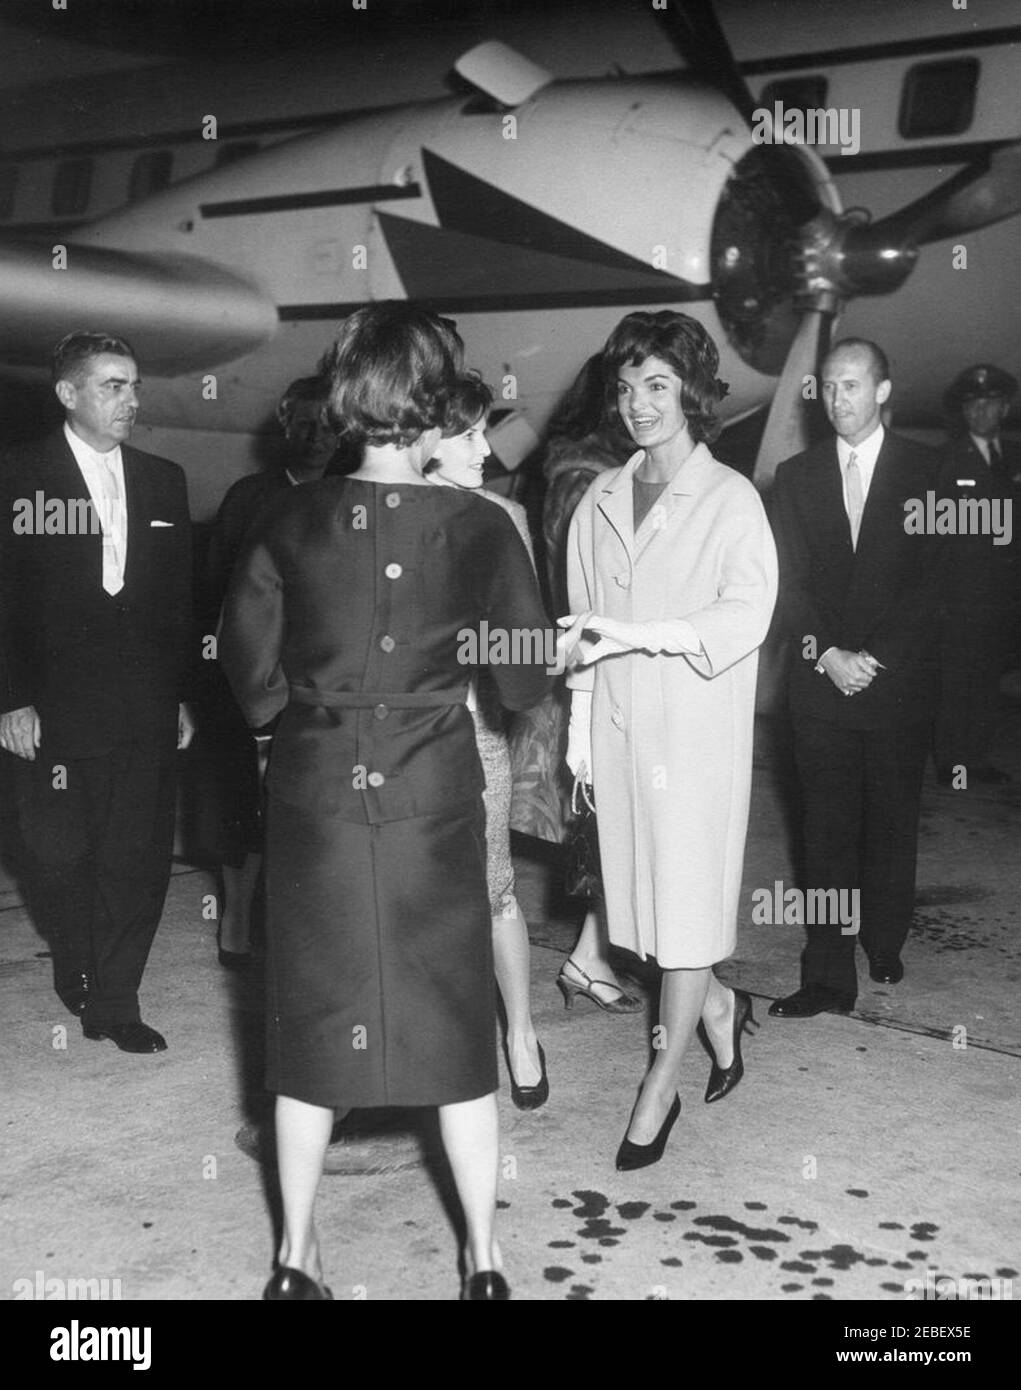 First Lady Jacqueline Kennedy (JBK) kommt von Europa aus auf der Andrews Air Force Base an. First Lady Jacqueline Kennedy kehrt von einer Reise nach Europa zurück. (L-R) Air Force Aide to the President Brigadier General Godfrey T. McHugh, two unidentified Women, the first Ladyu2019s Press Secretary Pamela Turnure, the First Lady, and State Department Chief of Protocol Angier Biddle Duke. Andrews Air Force Base, Maryland. Stockfoto